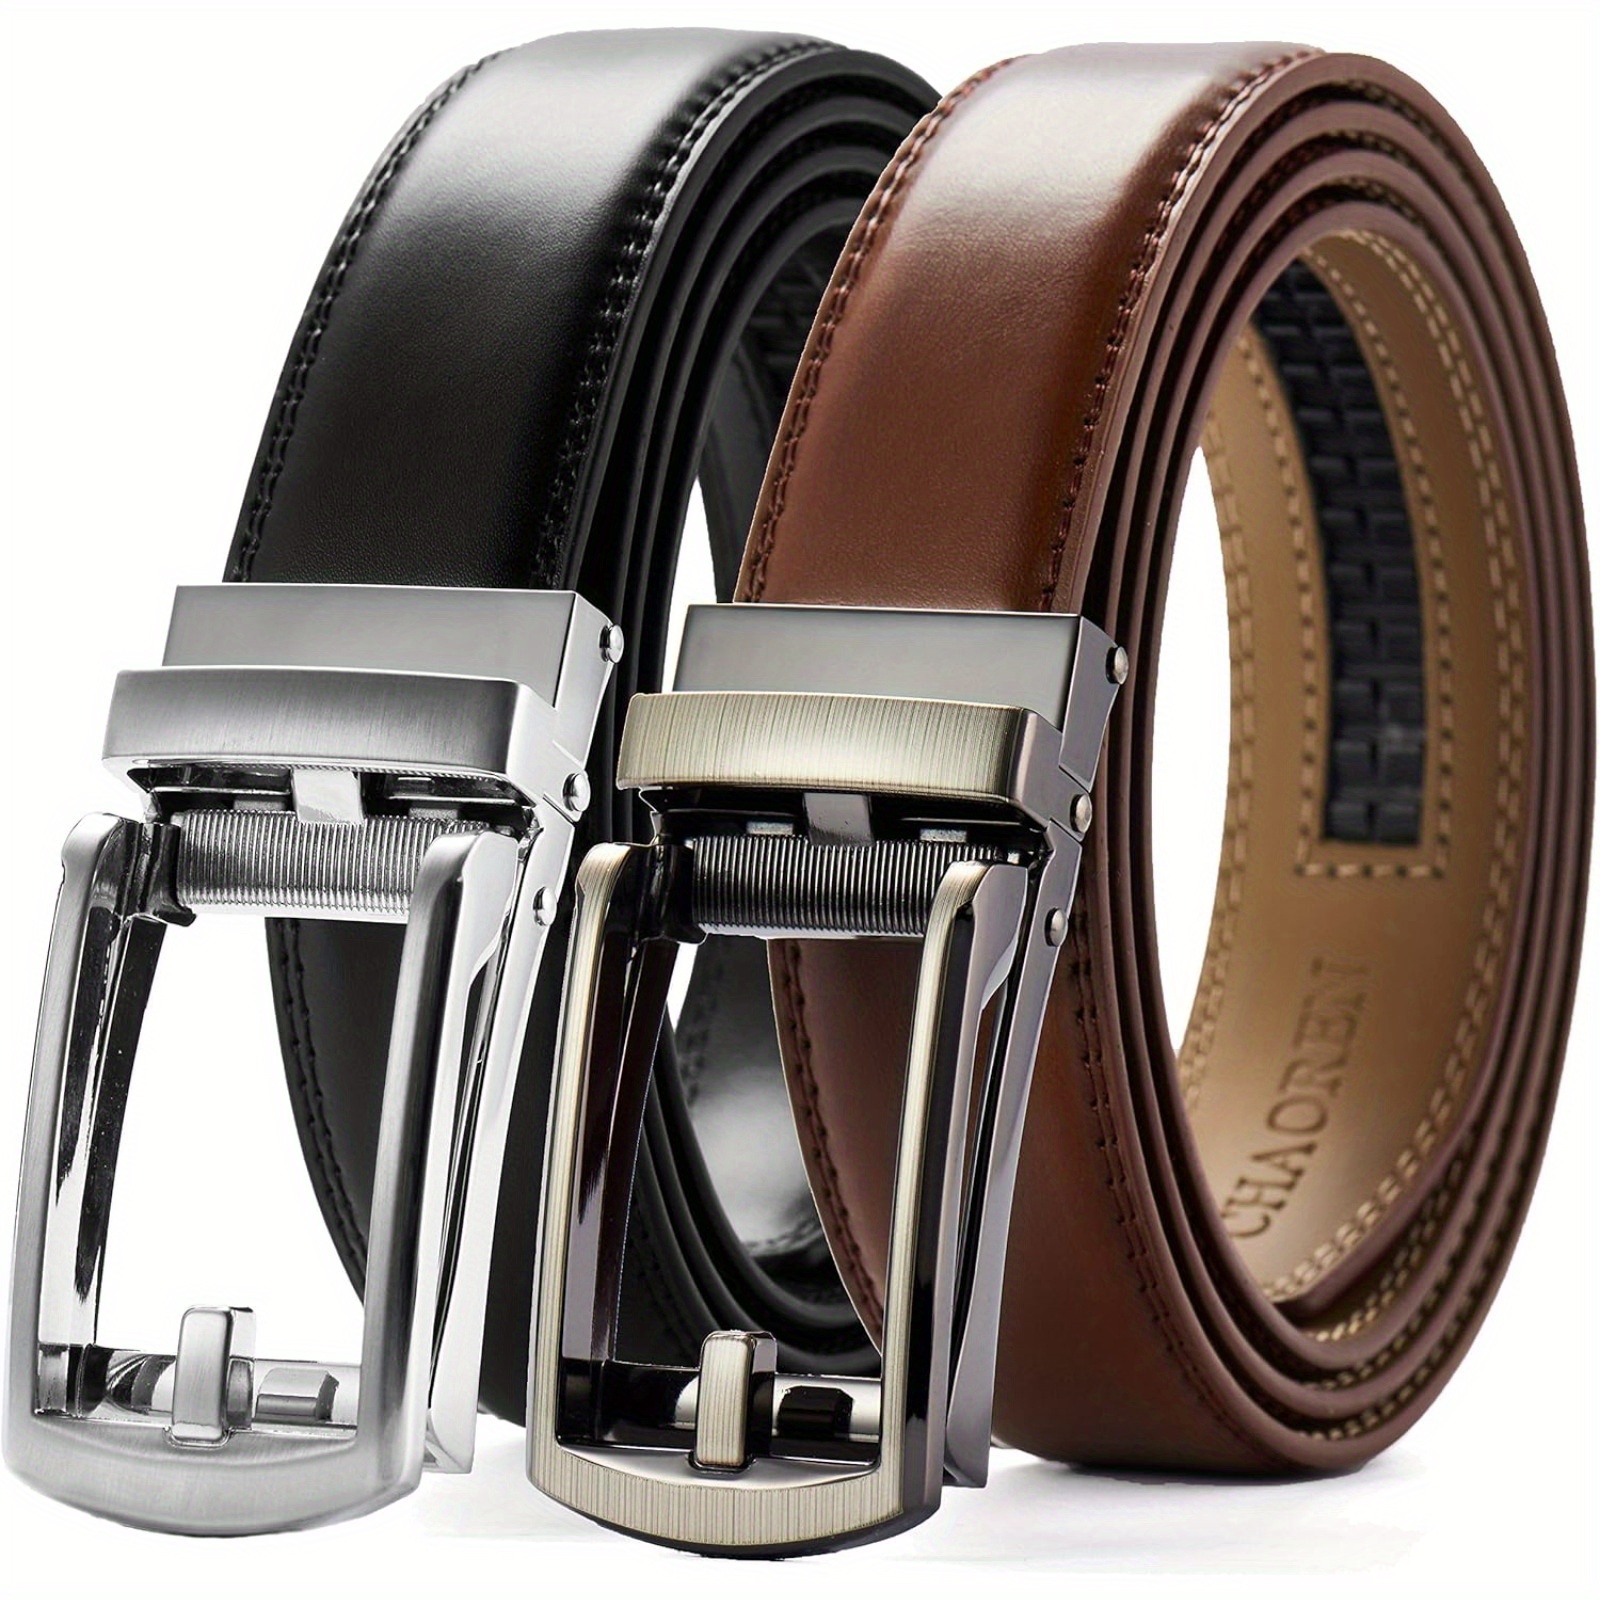 

Chaoren For Men 2 Pack - Mens Dress Belt 1 1/4" In Gift Set Box - Design Belt Meet Almost Any Occasion And Outfit